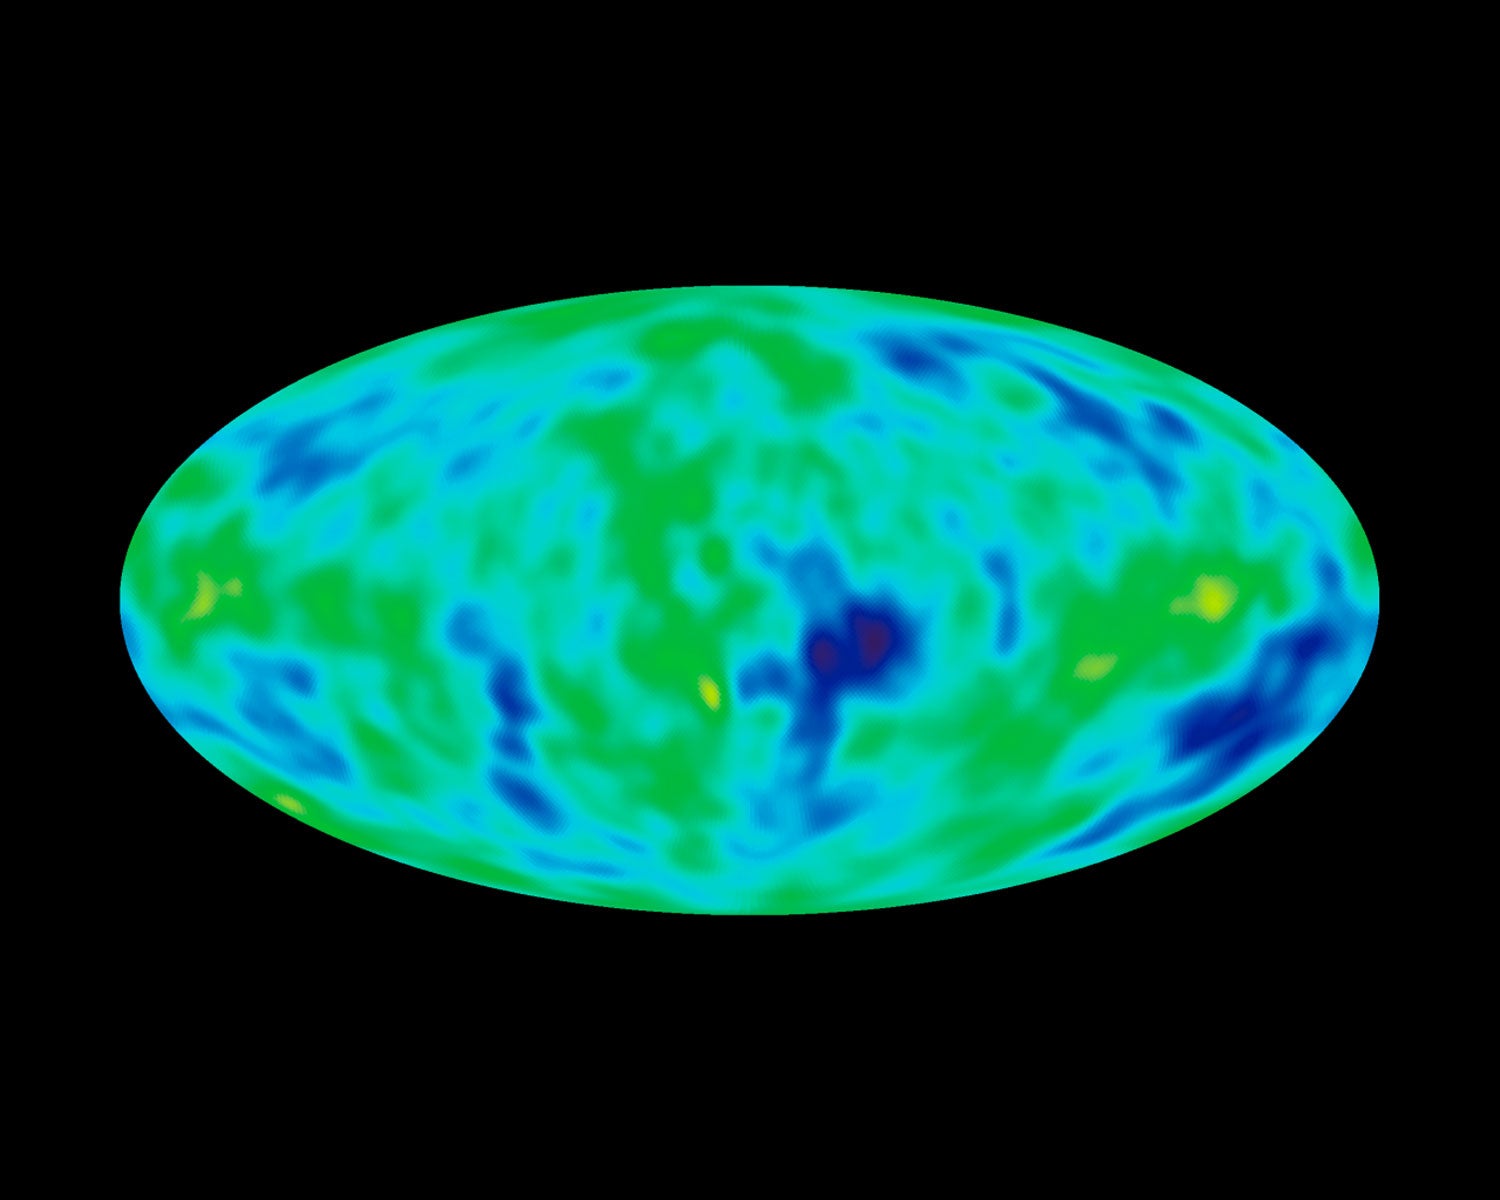 A COBE morph to WMAP sky map with the galaxy signal removed